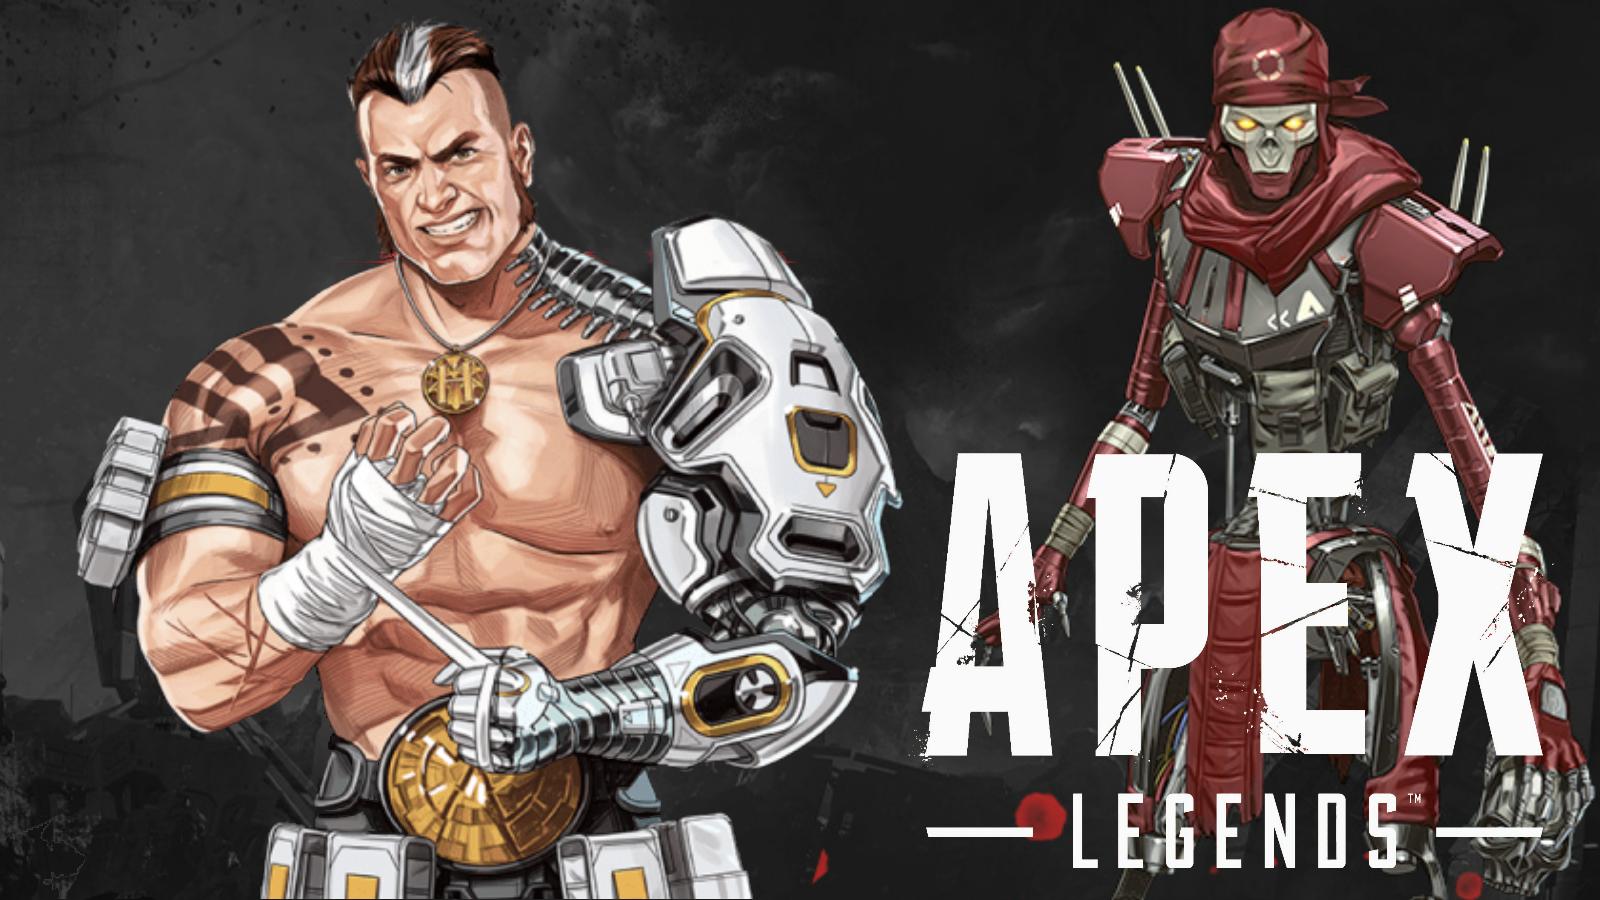 Hints & theories suggest Forge is still alive in Apex Legends